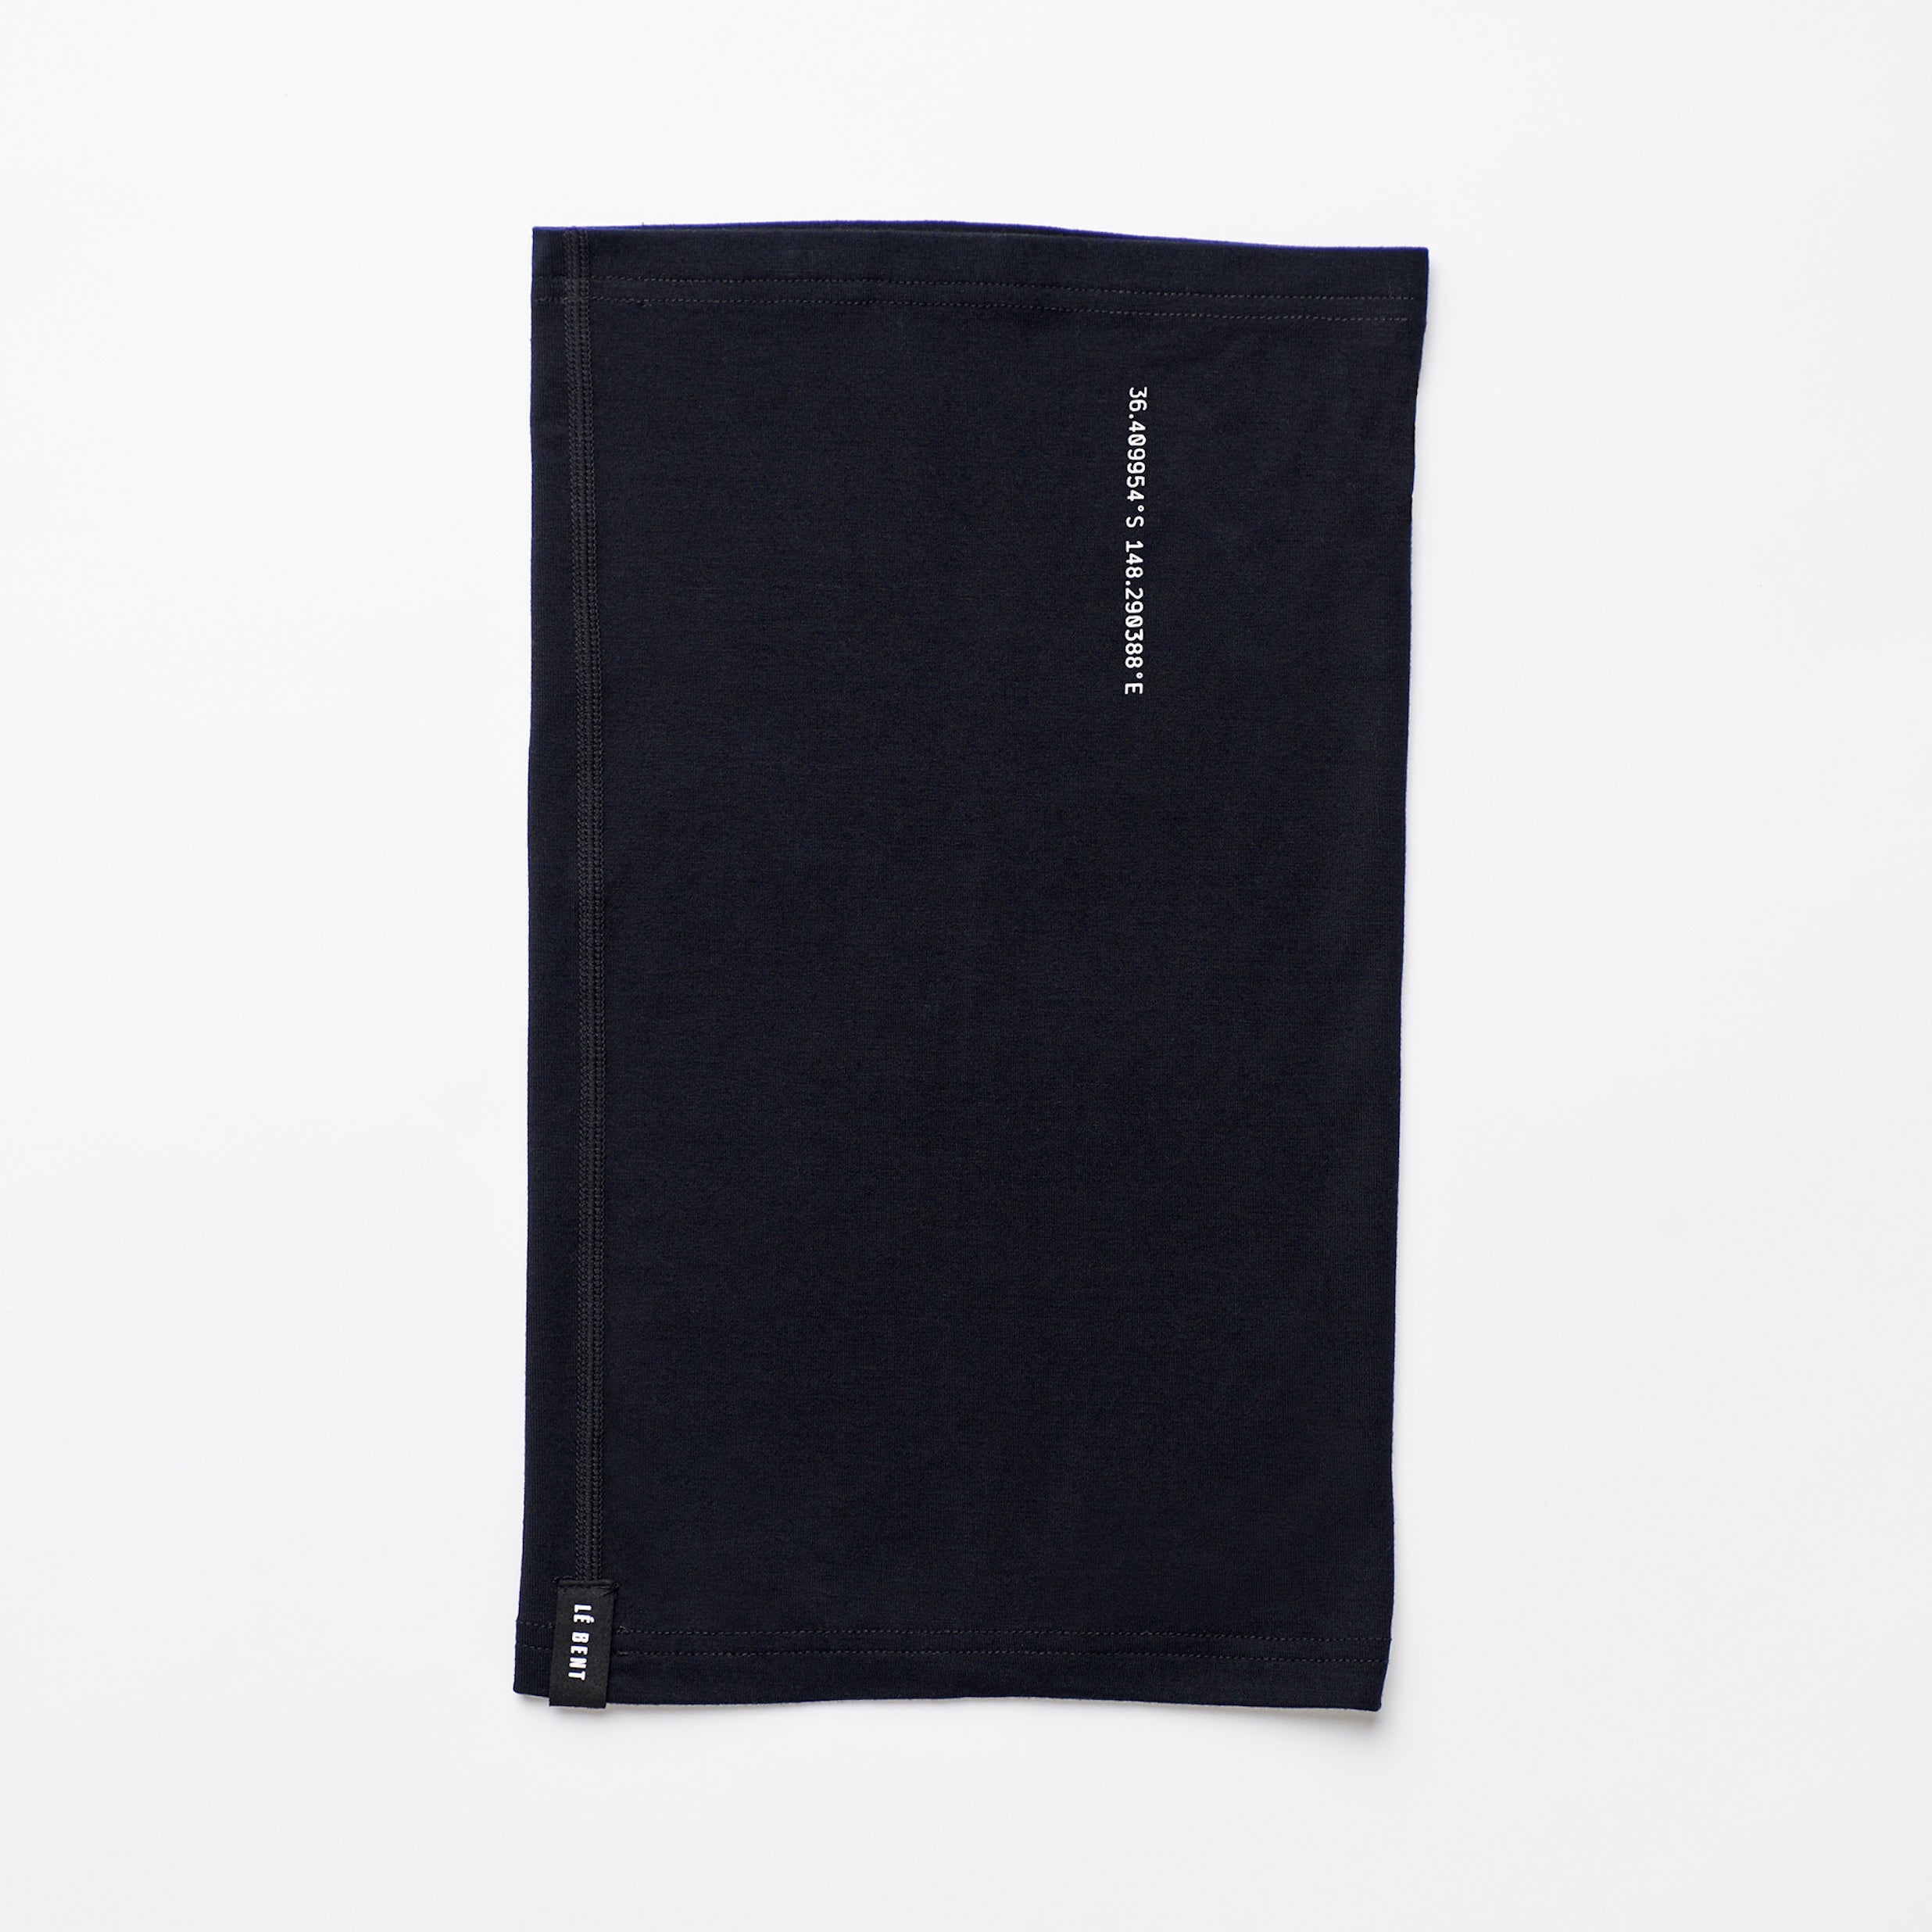 LeBent Core Lightweight Neck Gaiter all black with small white coordinates, square/tube shape.